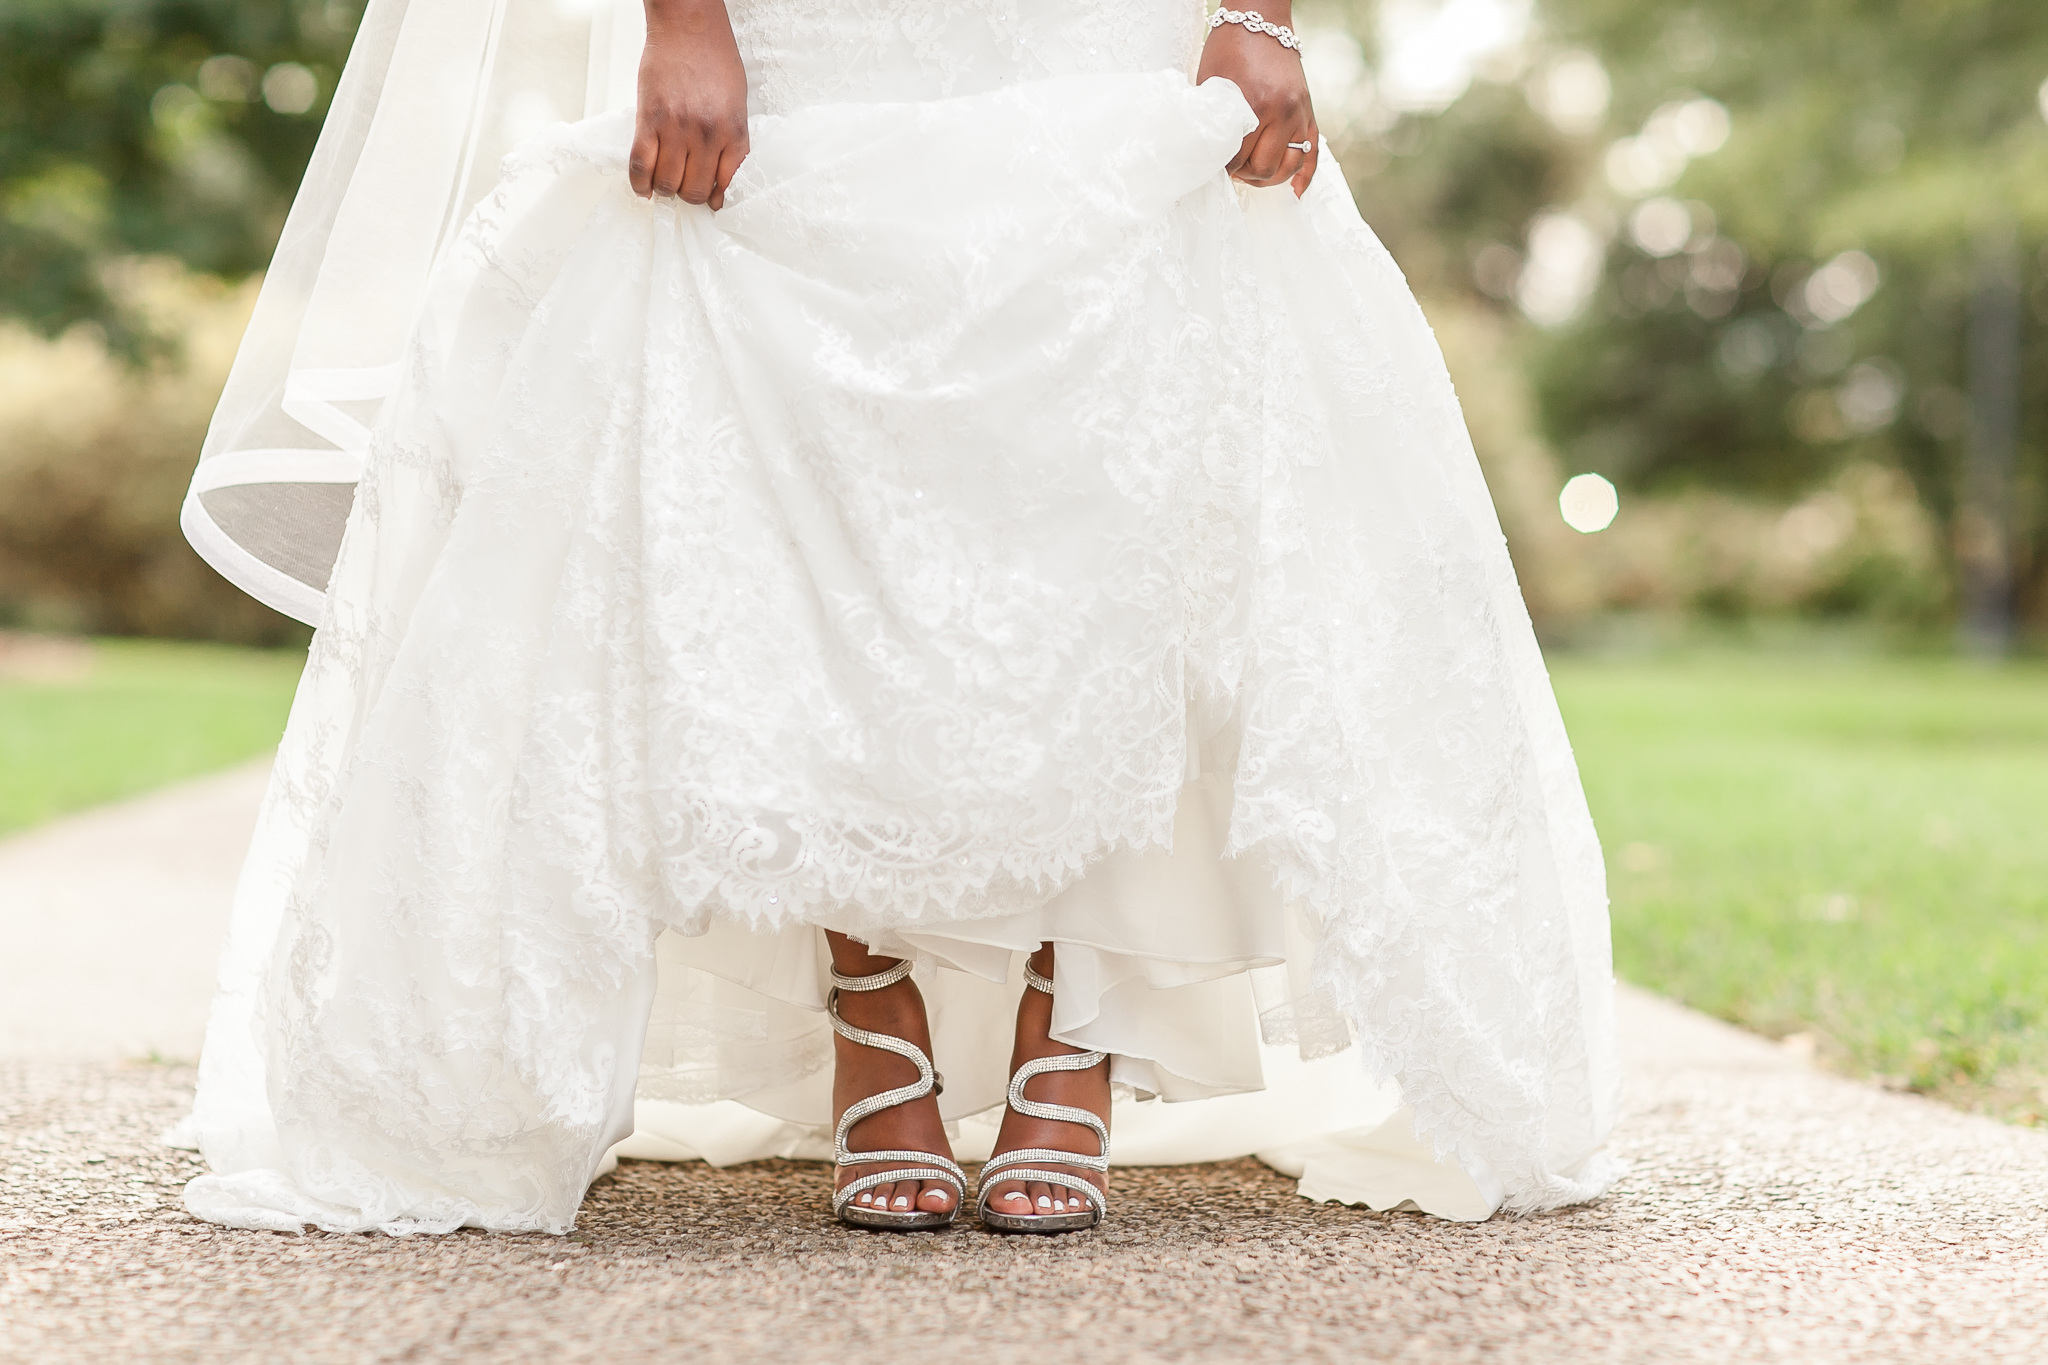 bride in wedding dress showing off wedding shoes at the South Carolina state house in Columbia, SC